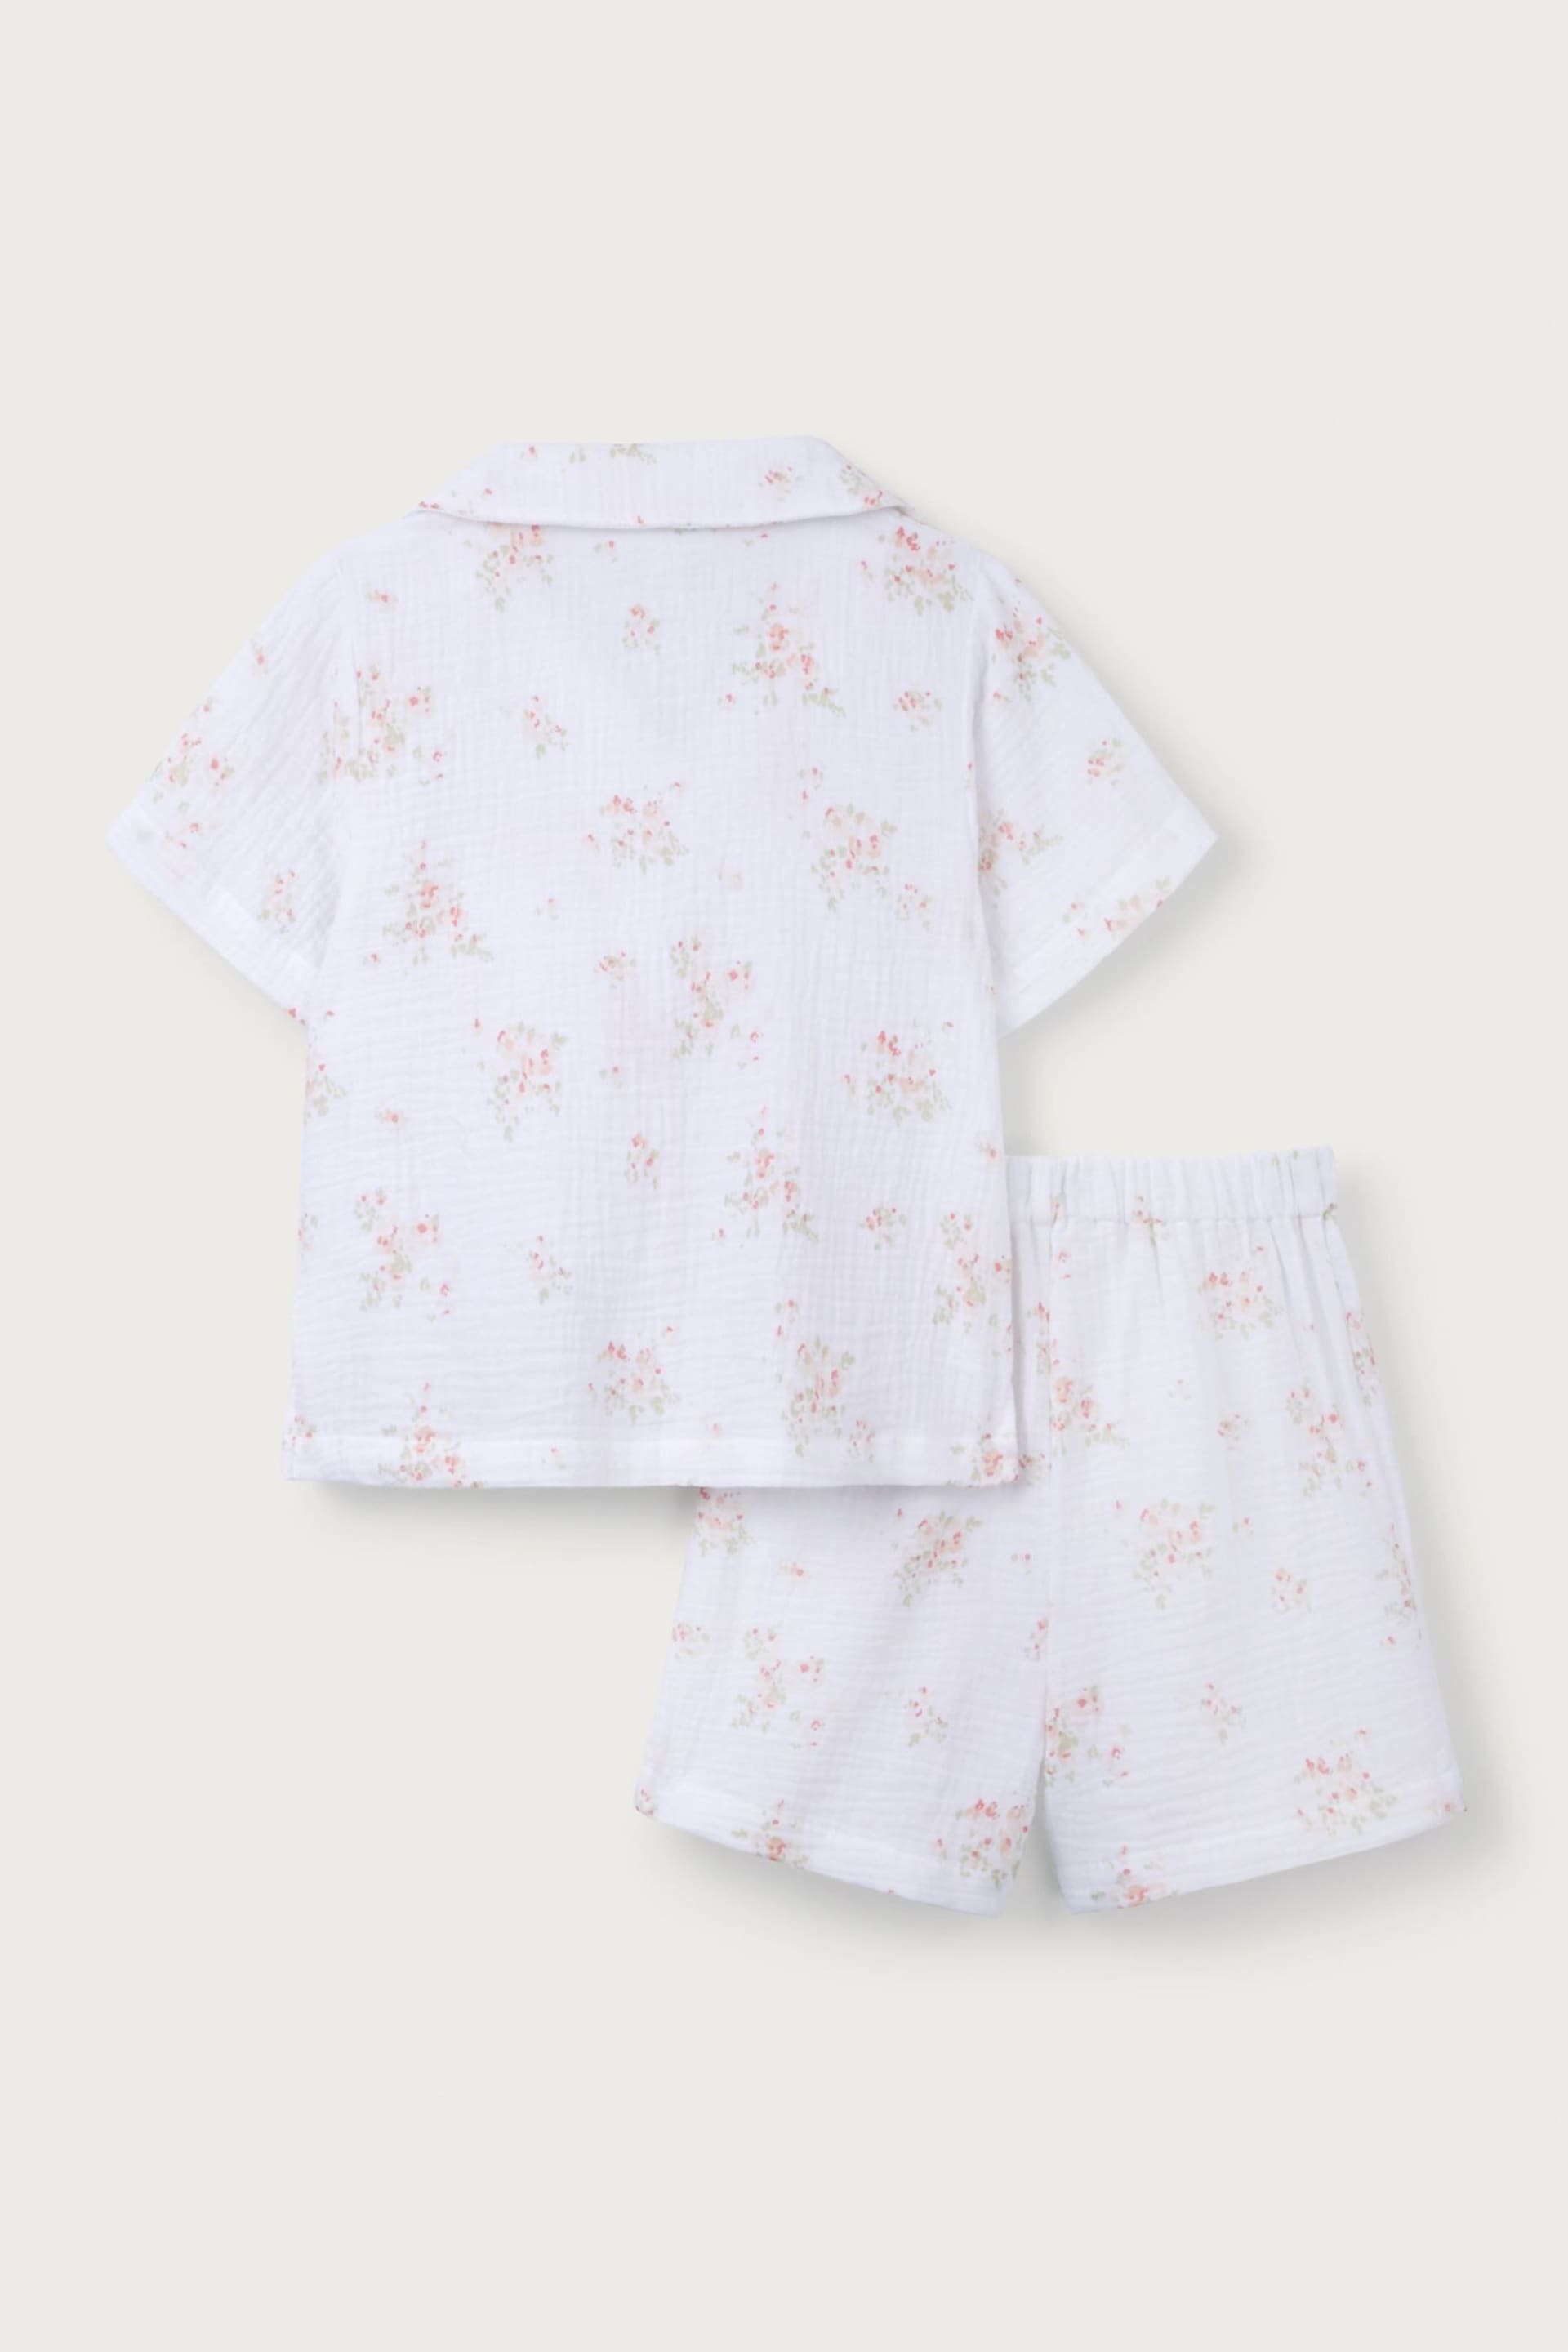 The White Company Organic Cotton Vintage Floral Classic Shortie White Pyjamas - Image 5 of 6